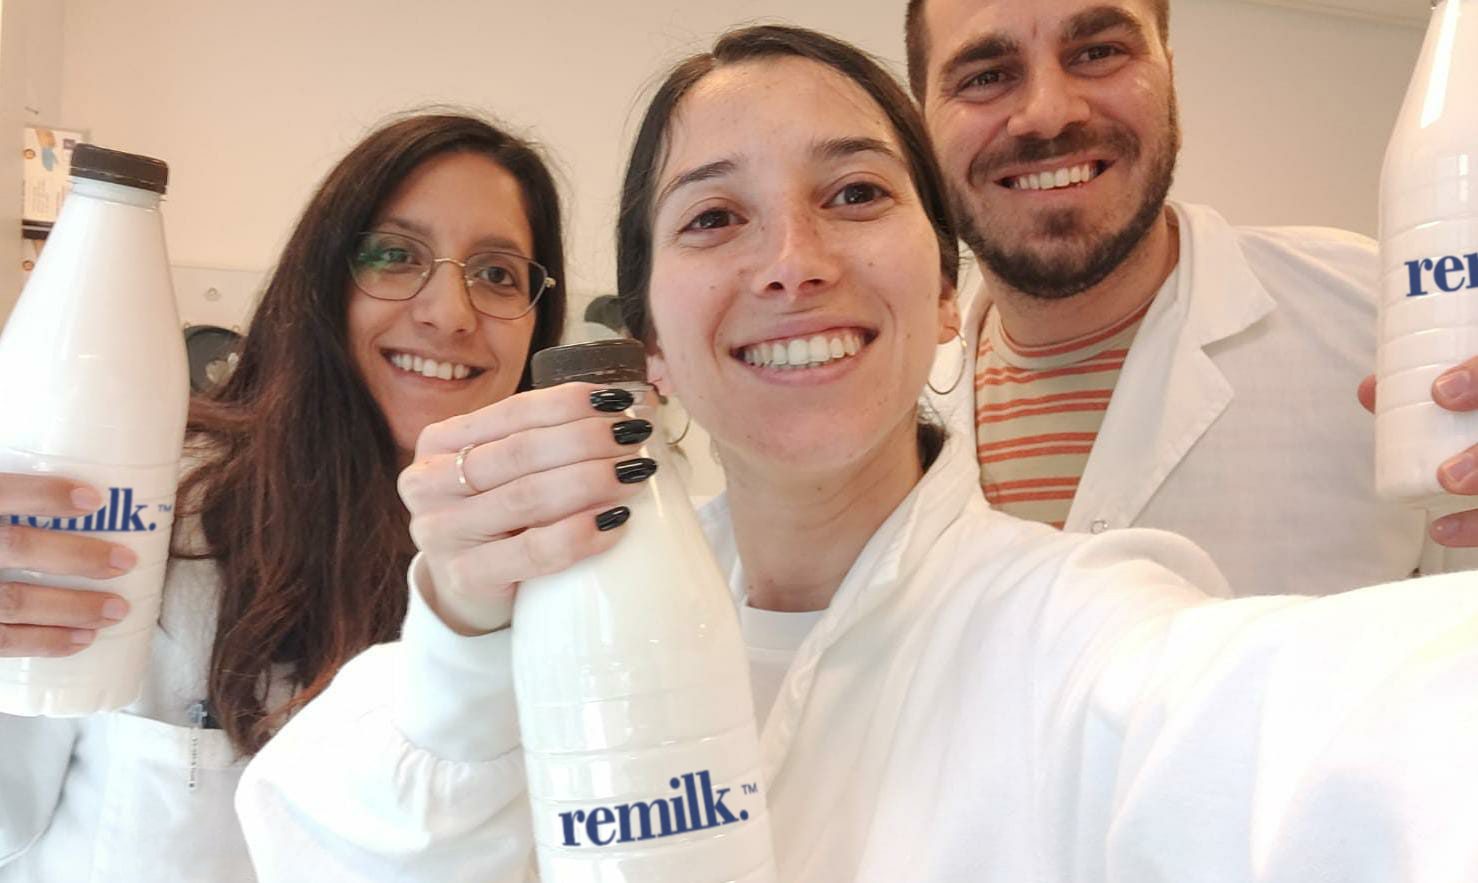 Remilk workers hold a jar of their animal-free milk